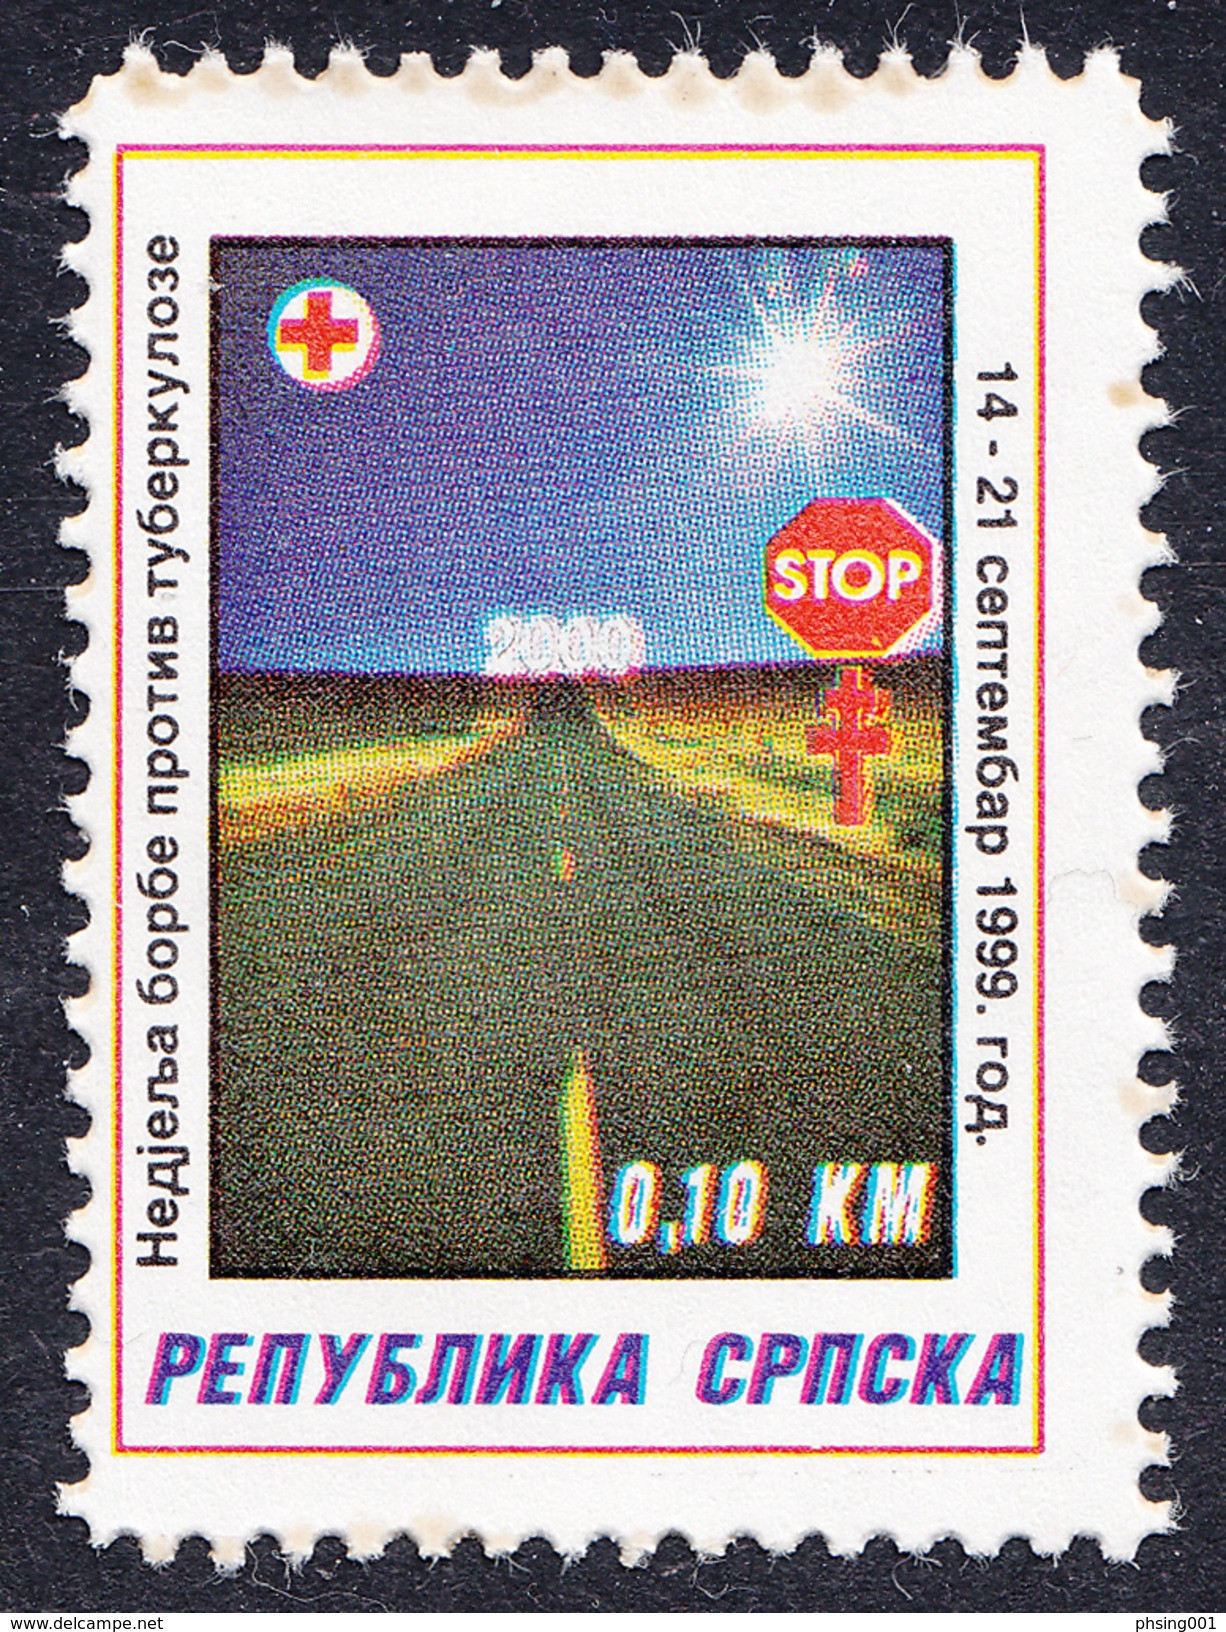 Bosnia Serbia 1999 TBC Red Cross Rotes Kreuz Croix Rouge Tree, Tax Charity Surcharge MNH - Bosnien-Herzegowina